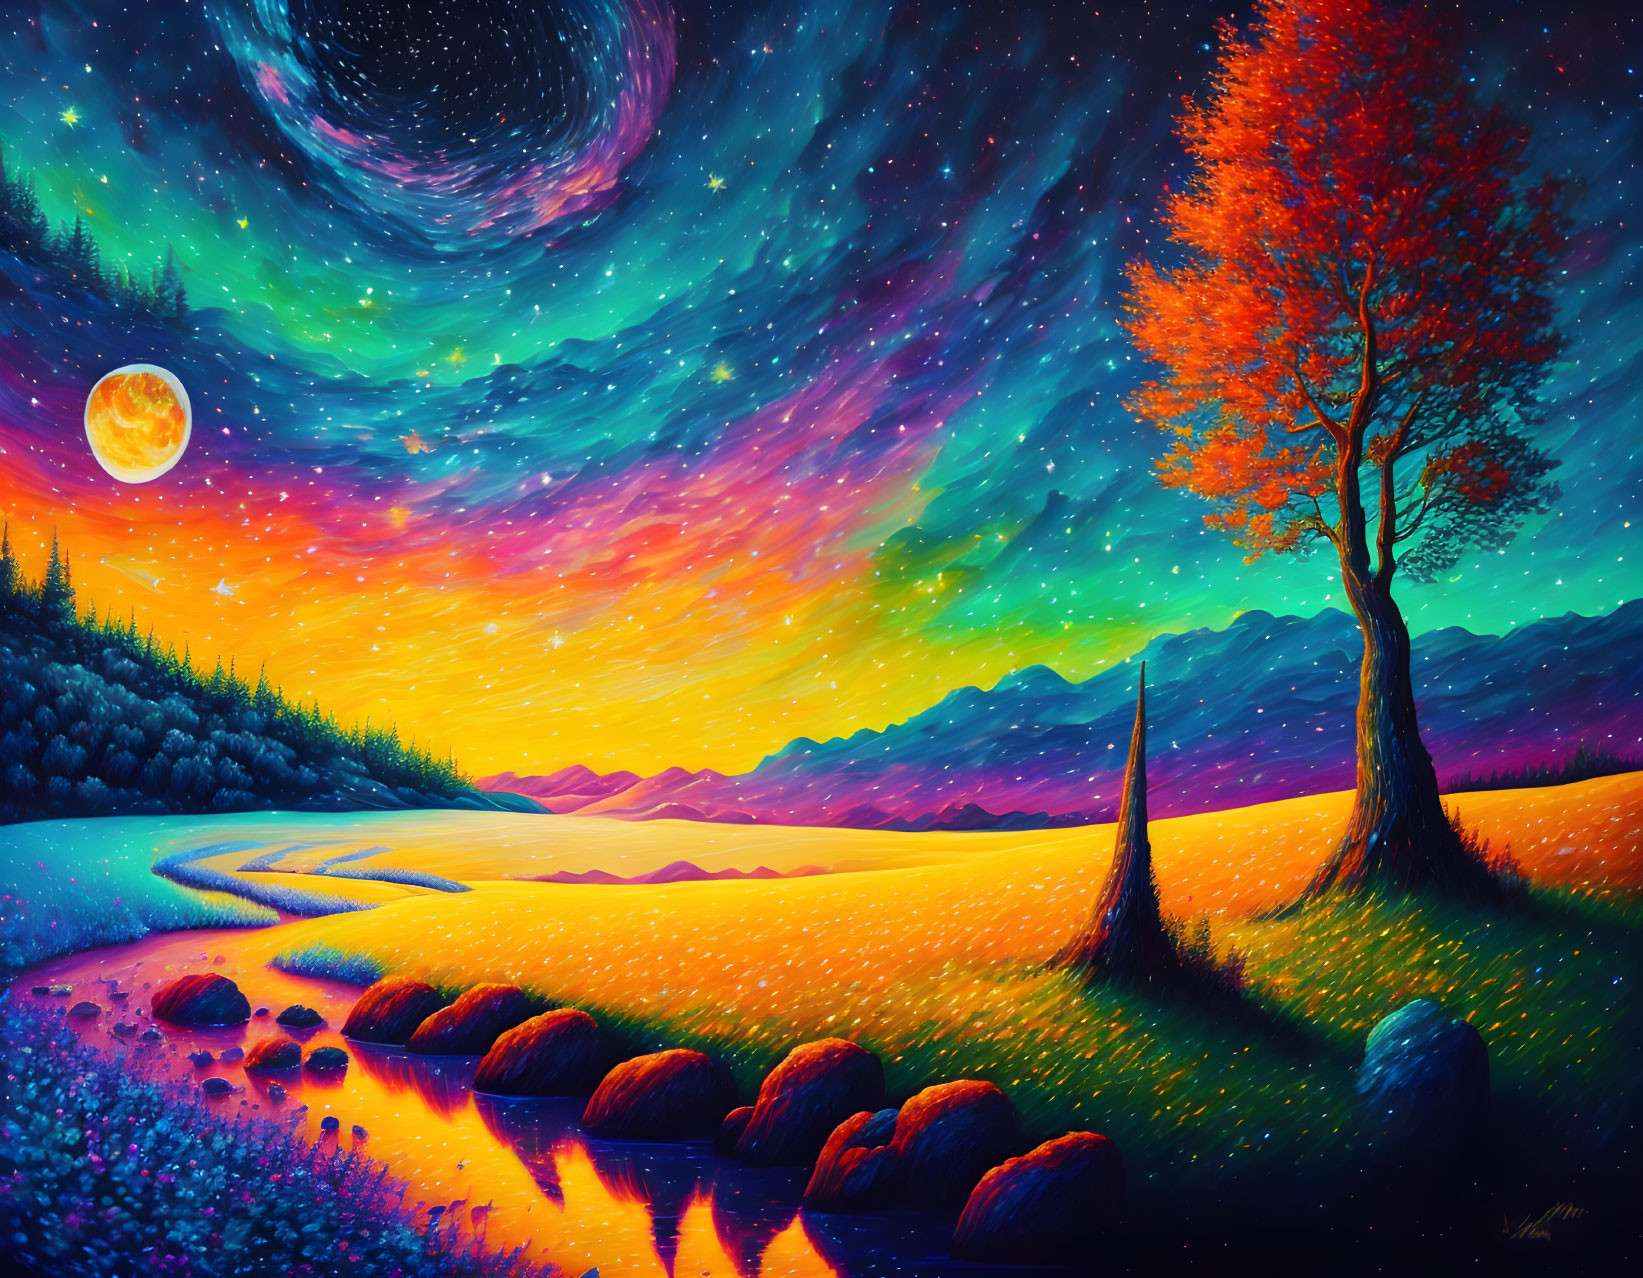 Colorful fantasy landscape with starry sky, moon, trees, river, and sunset gradient